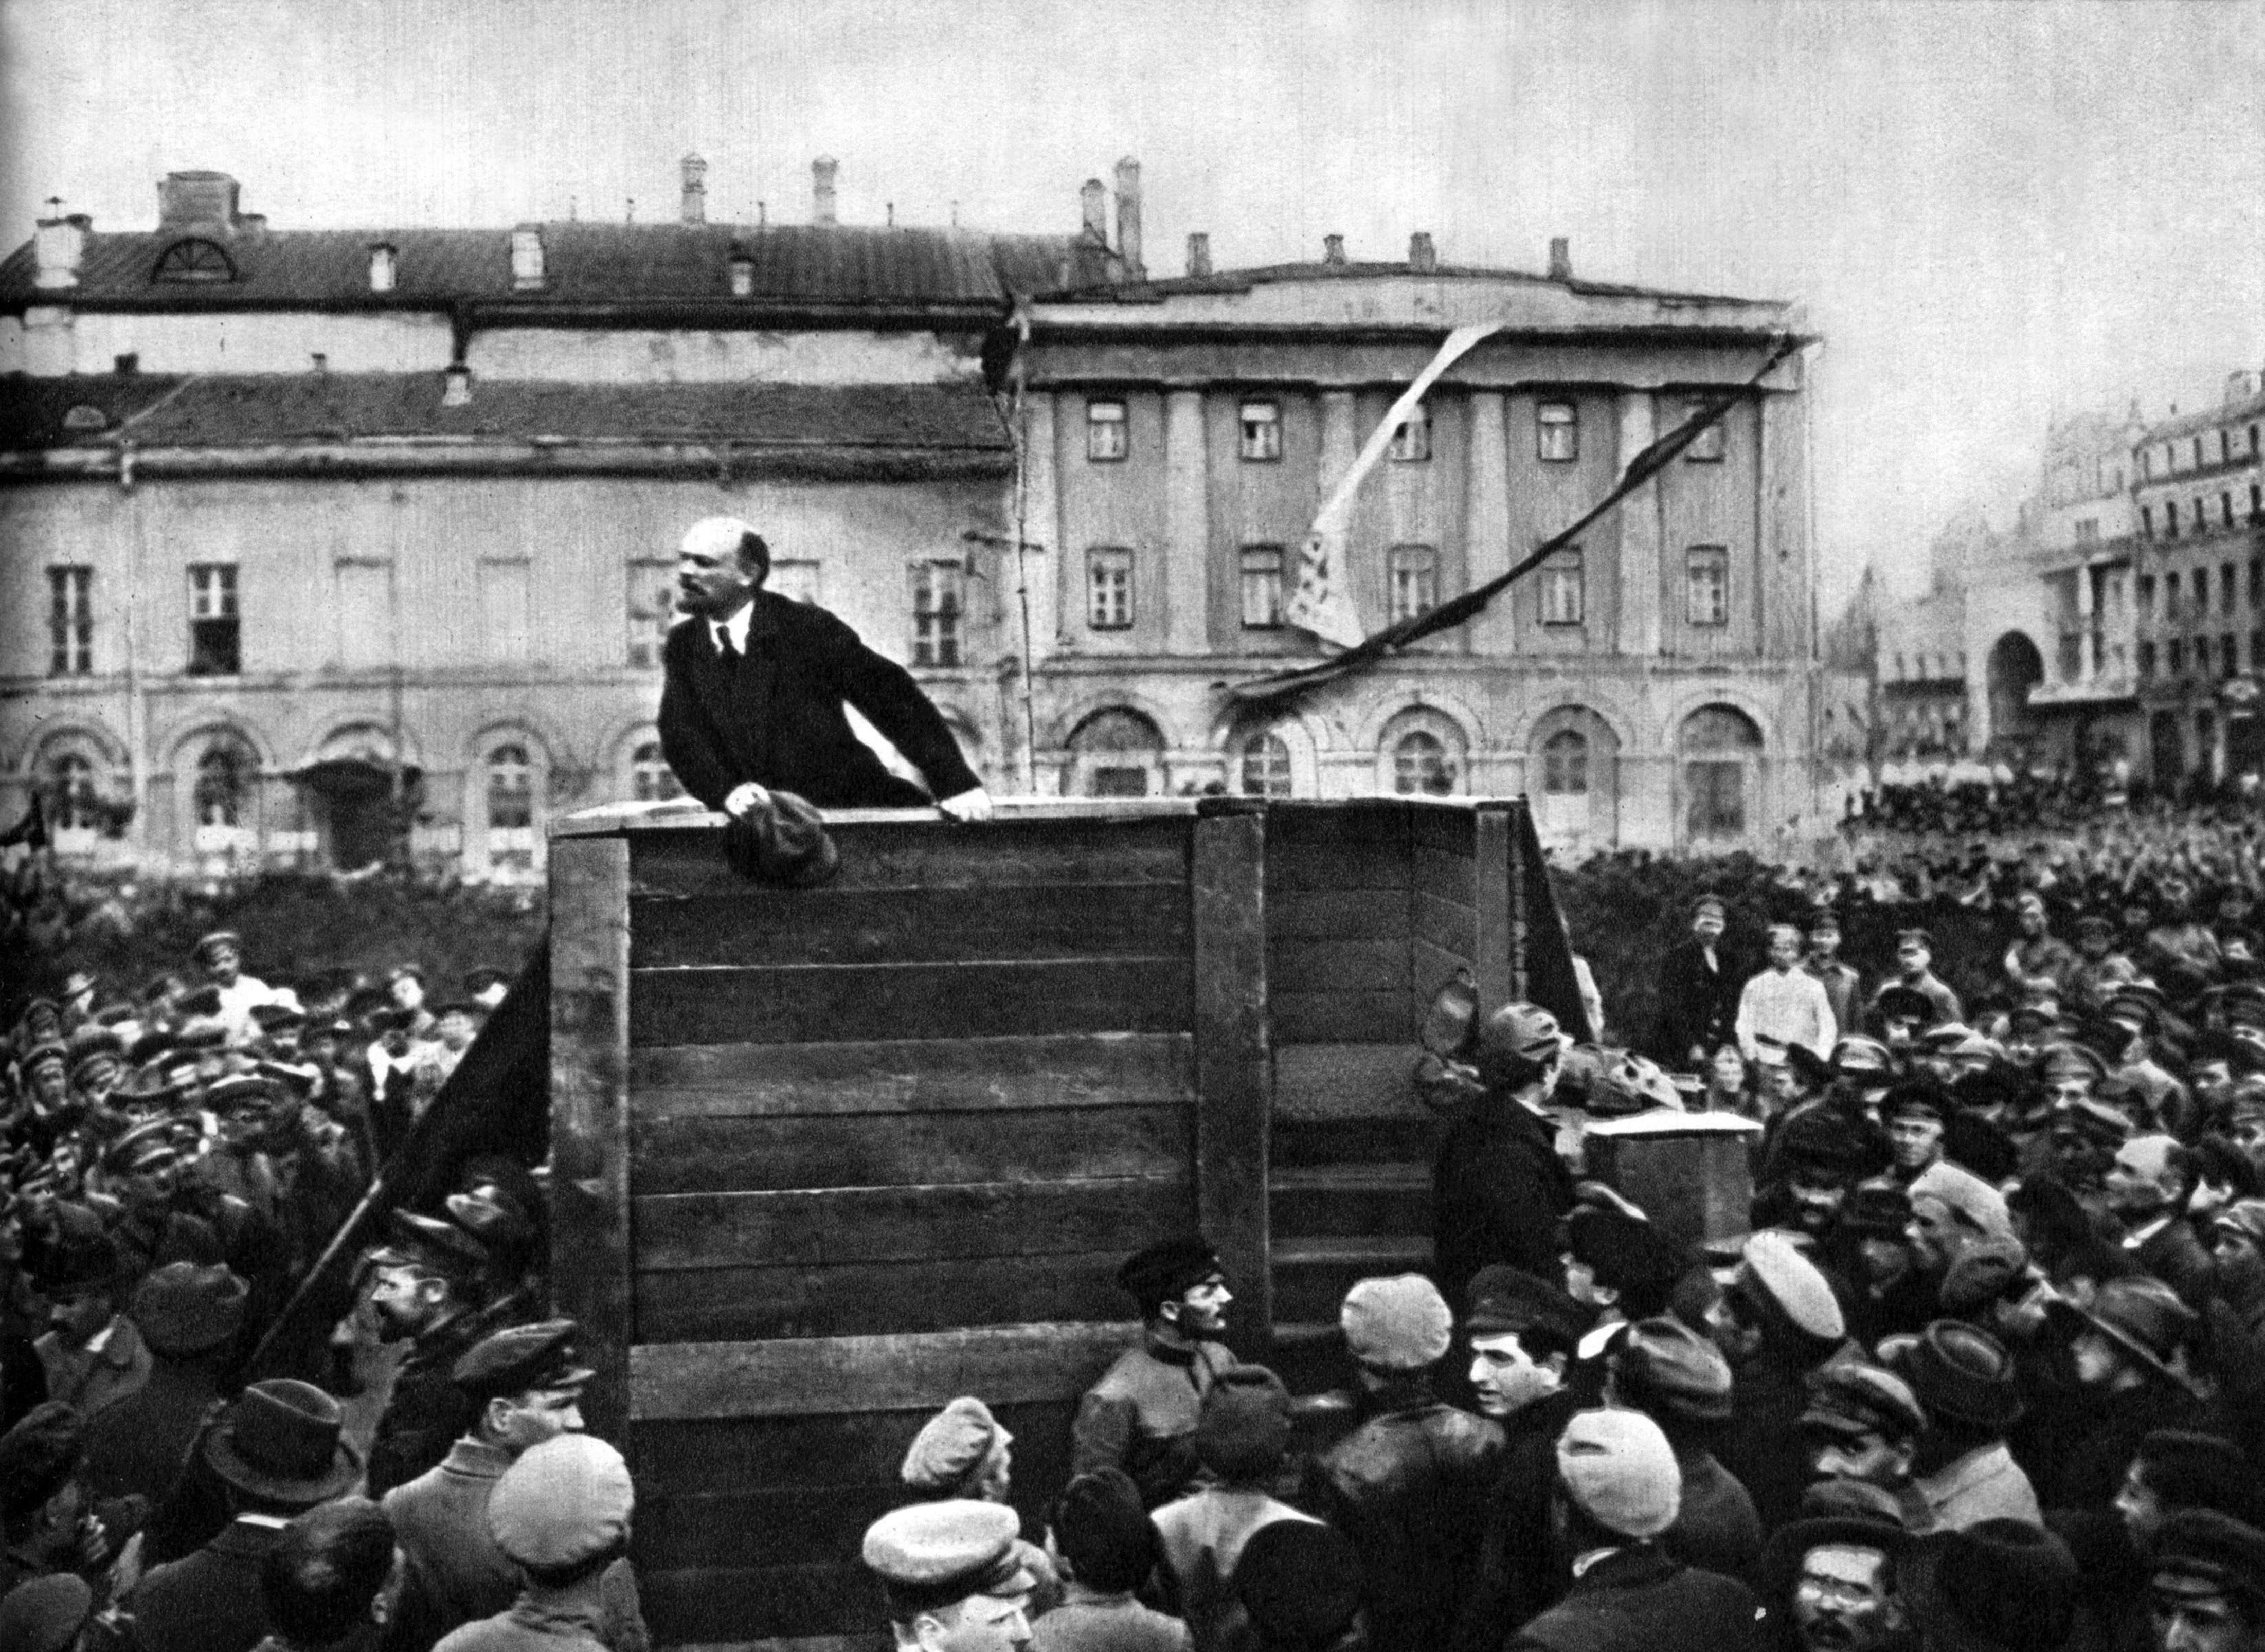 Vladimir Lenin, in Moscow’s Sverdlov Square in 1920, gives a speech to Red Army members leaving for the front during the Polish-Soviet War